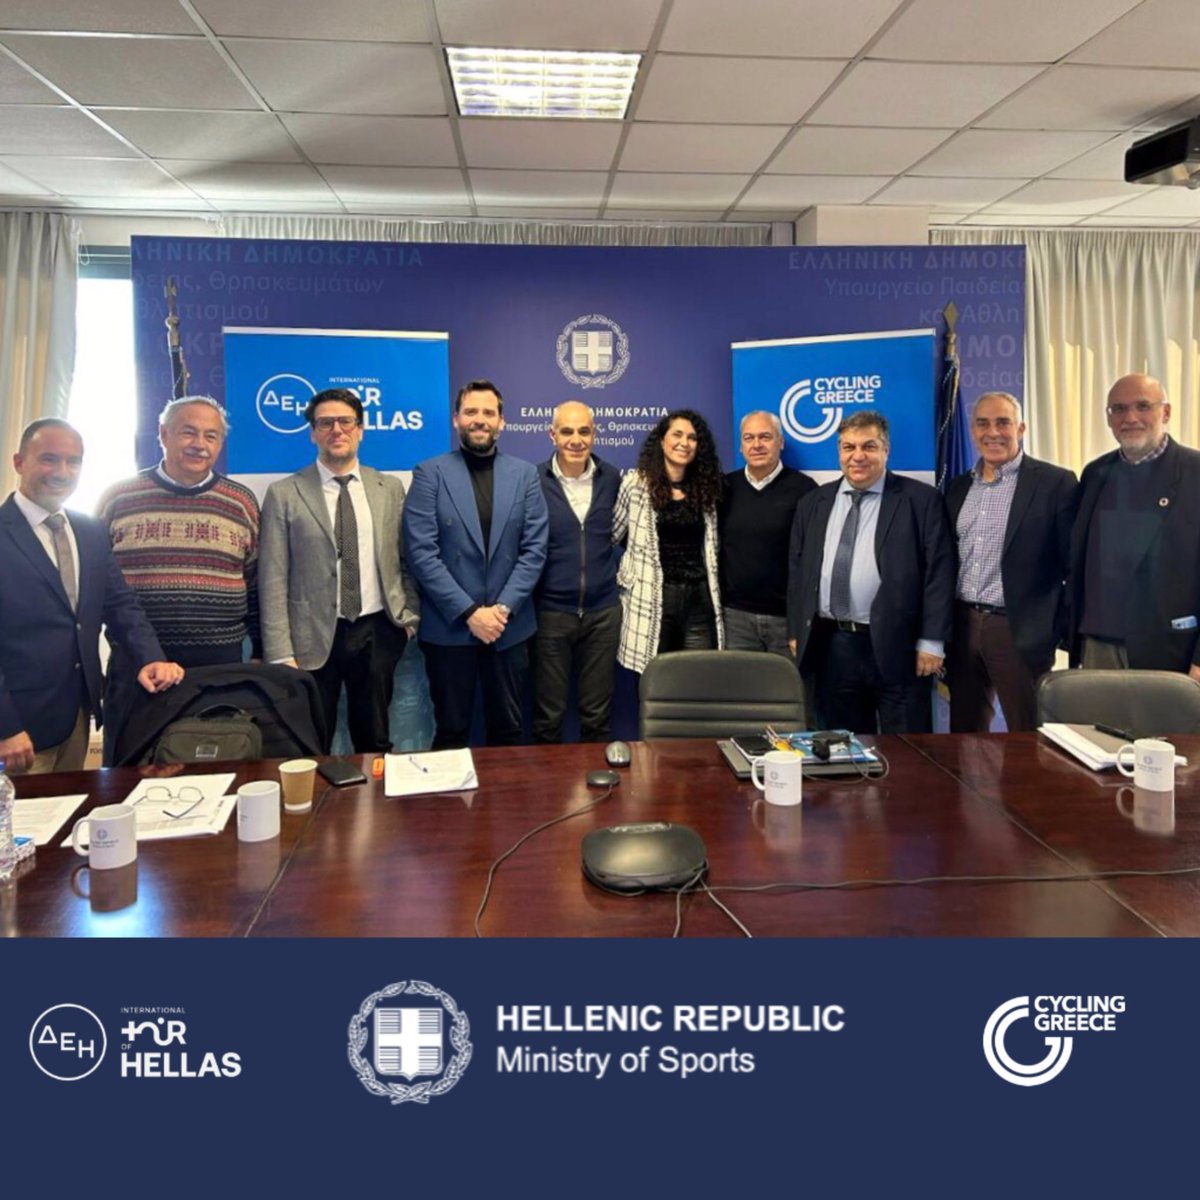 The first general assembly of the organizing committee, Cycling Greece, for the ΔΕΗ @tourofhellas 2024 took place! The race is scheduled to kick off on May 15th from Thessaloniki and finish in Athens after an 870 km route across Greece! @VroutsisGiannis @UCI_cycling